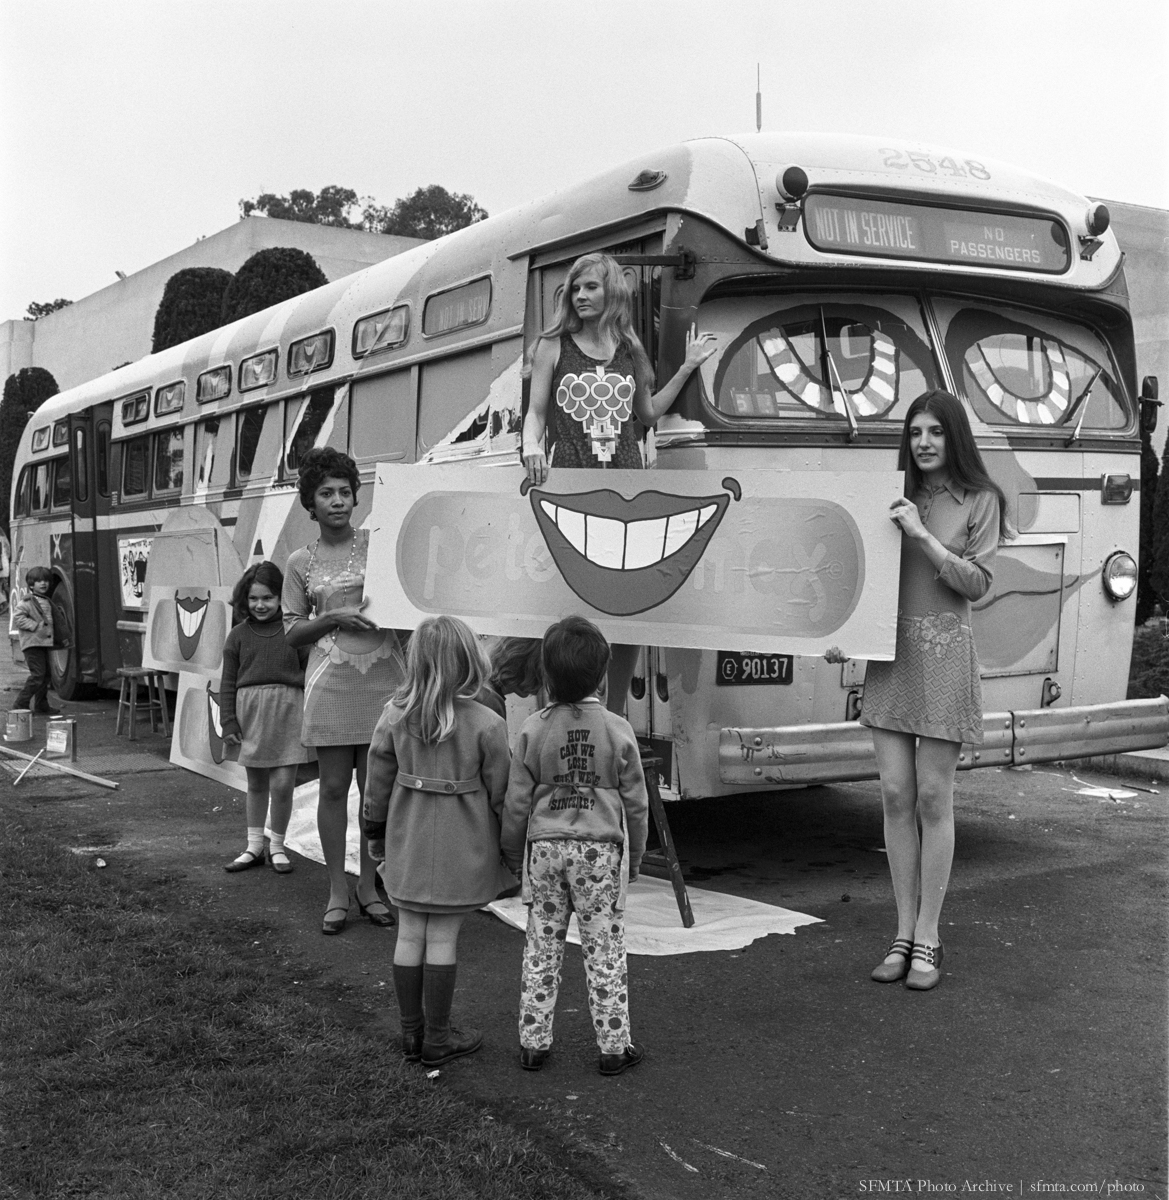 Artists Painting on Mack Motor Coach for Peter Max Art Exhibit at the de Young Museum | March 11, 1970 | M0805_11